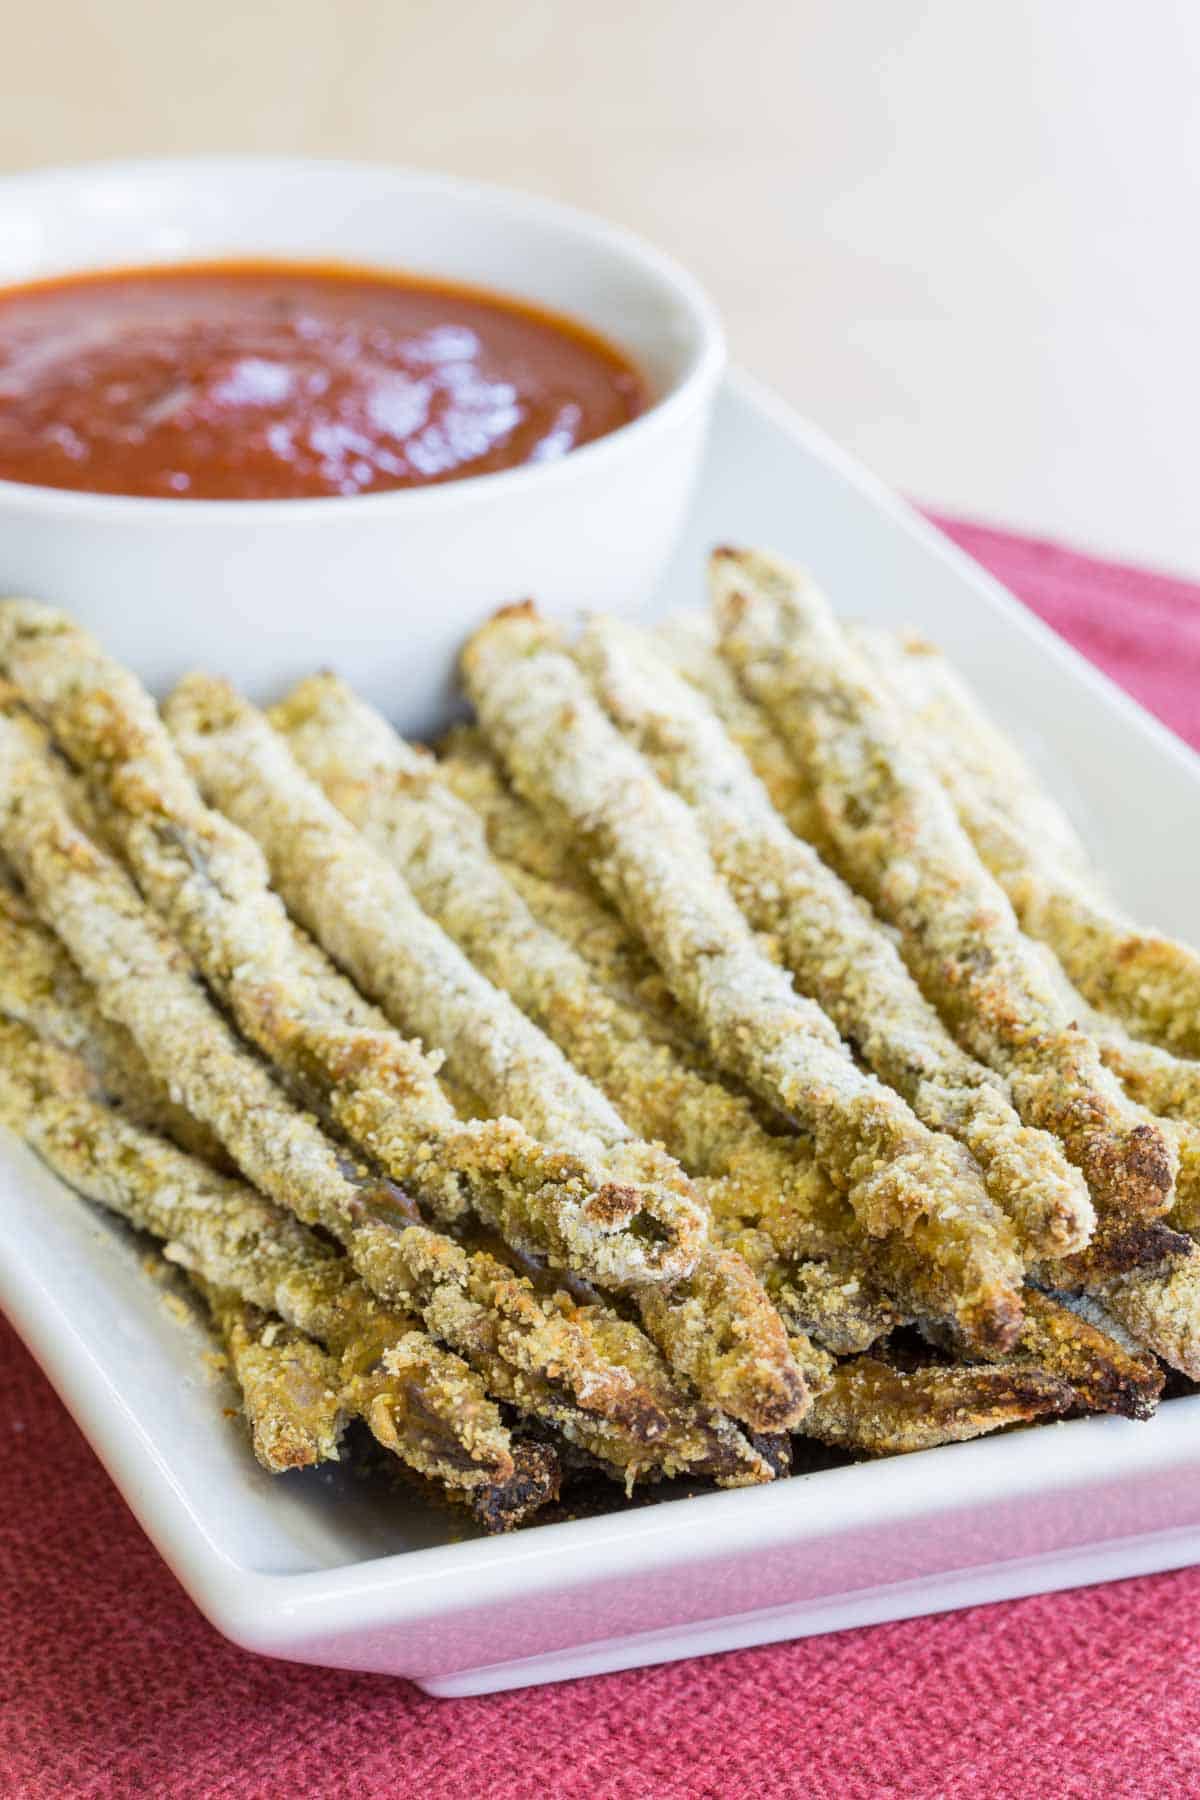 A plate of asparagus fries with a bowl of marinara sauce.